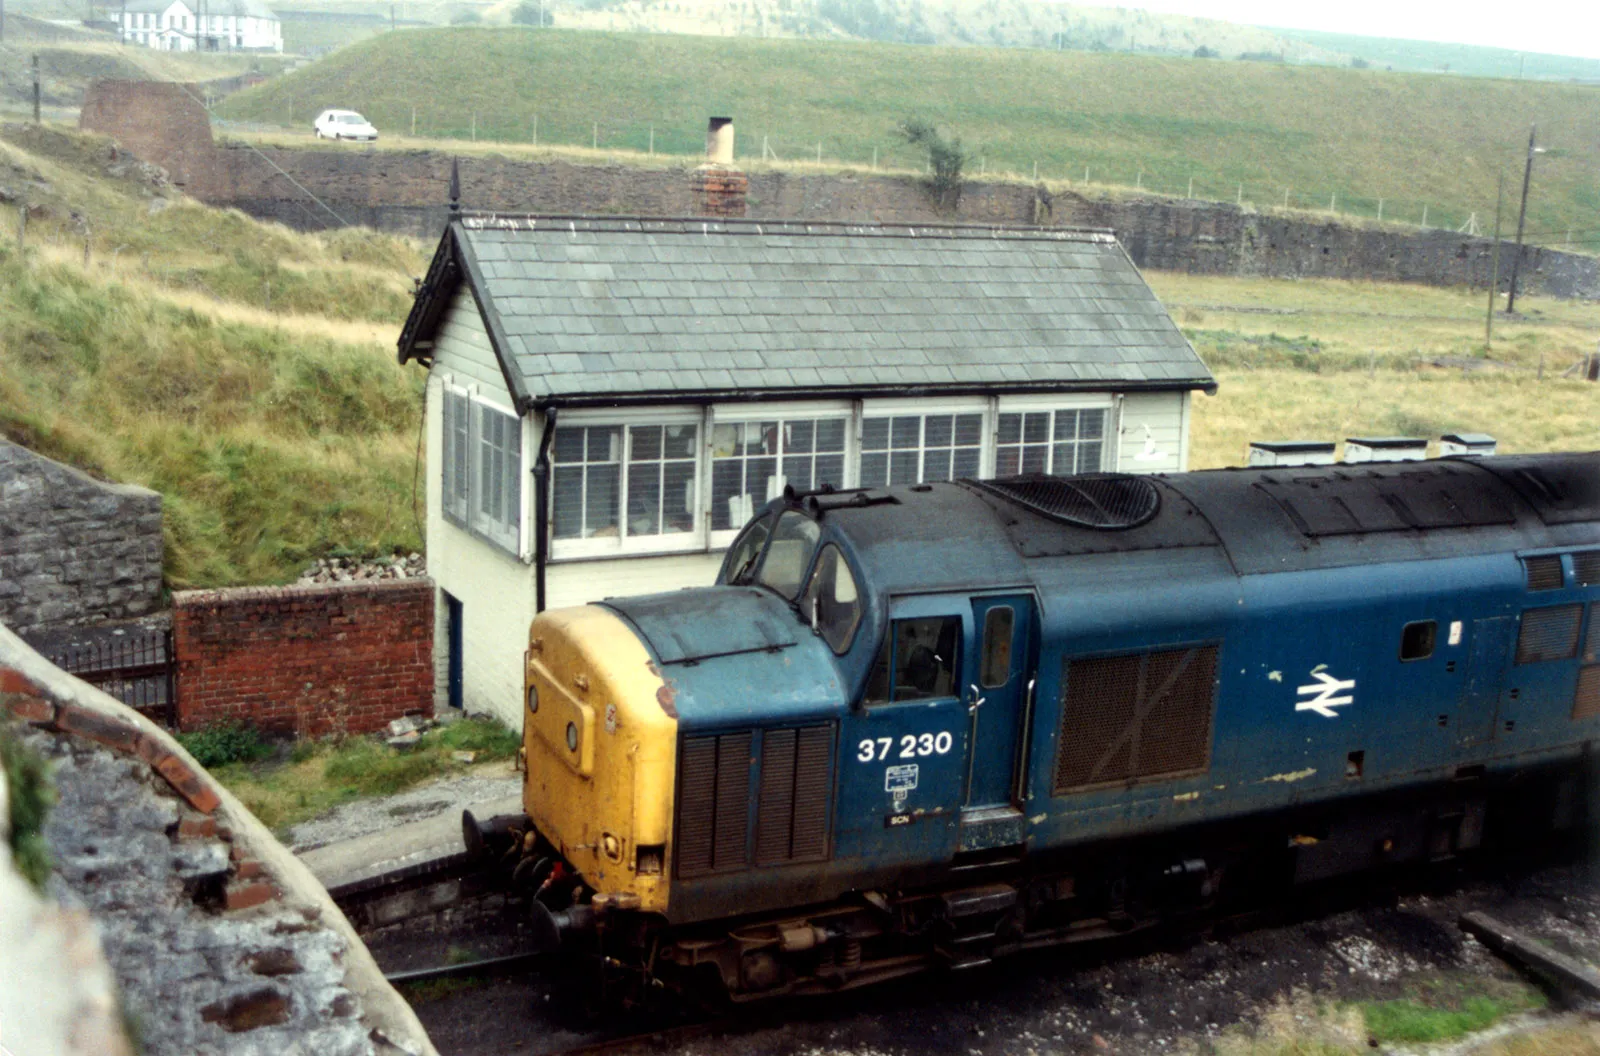 Photo showing: 37230 at Onllwyn washery. The signal box is now demolished